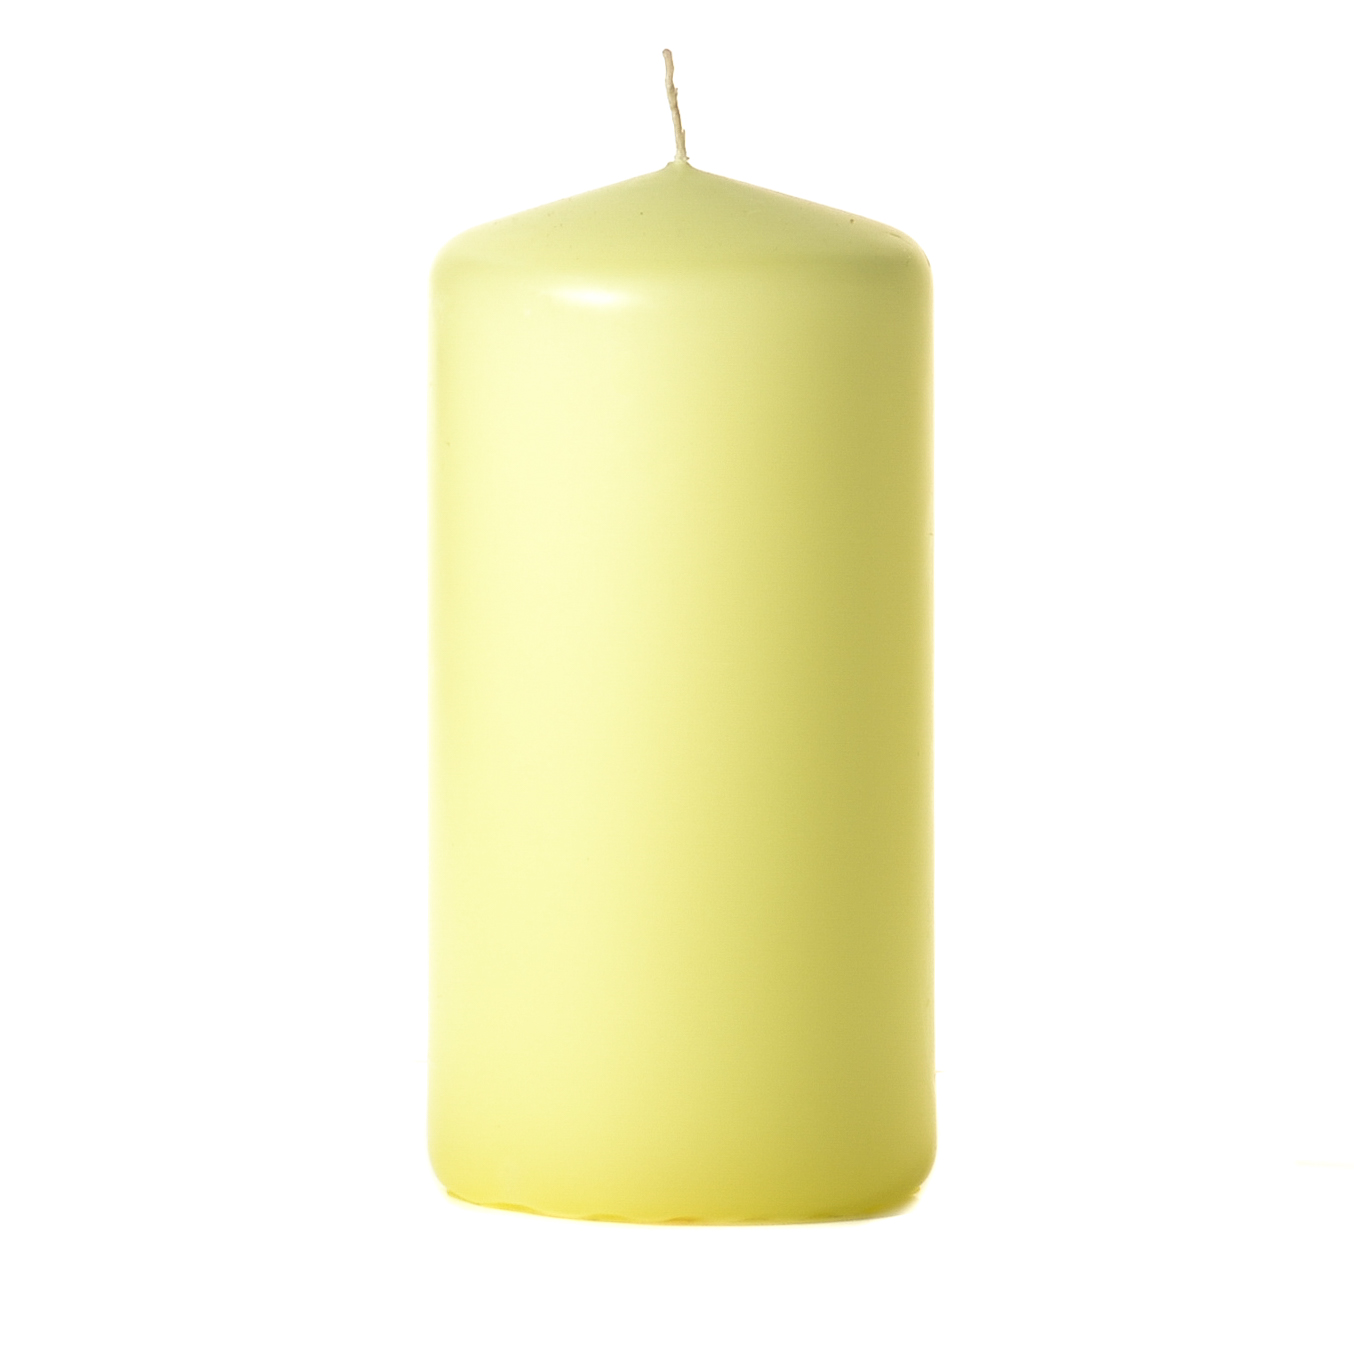 3x6 Pale Yellow Pillar Candles Unscented